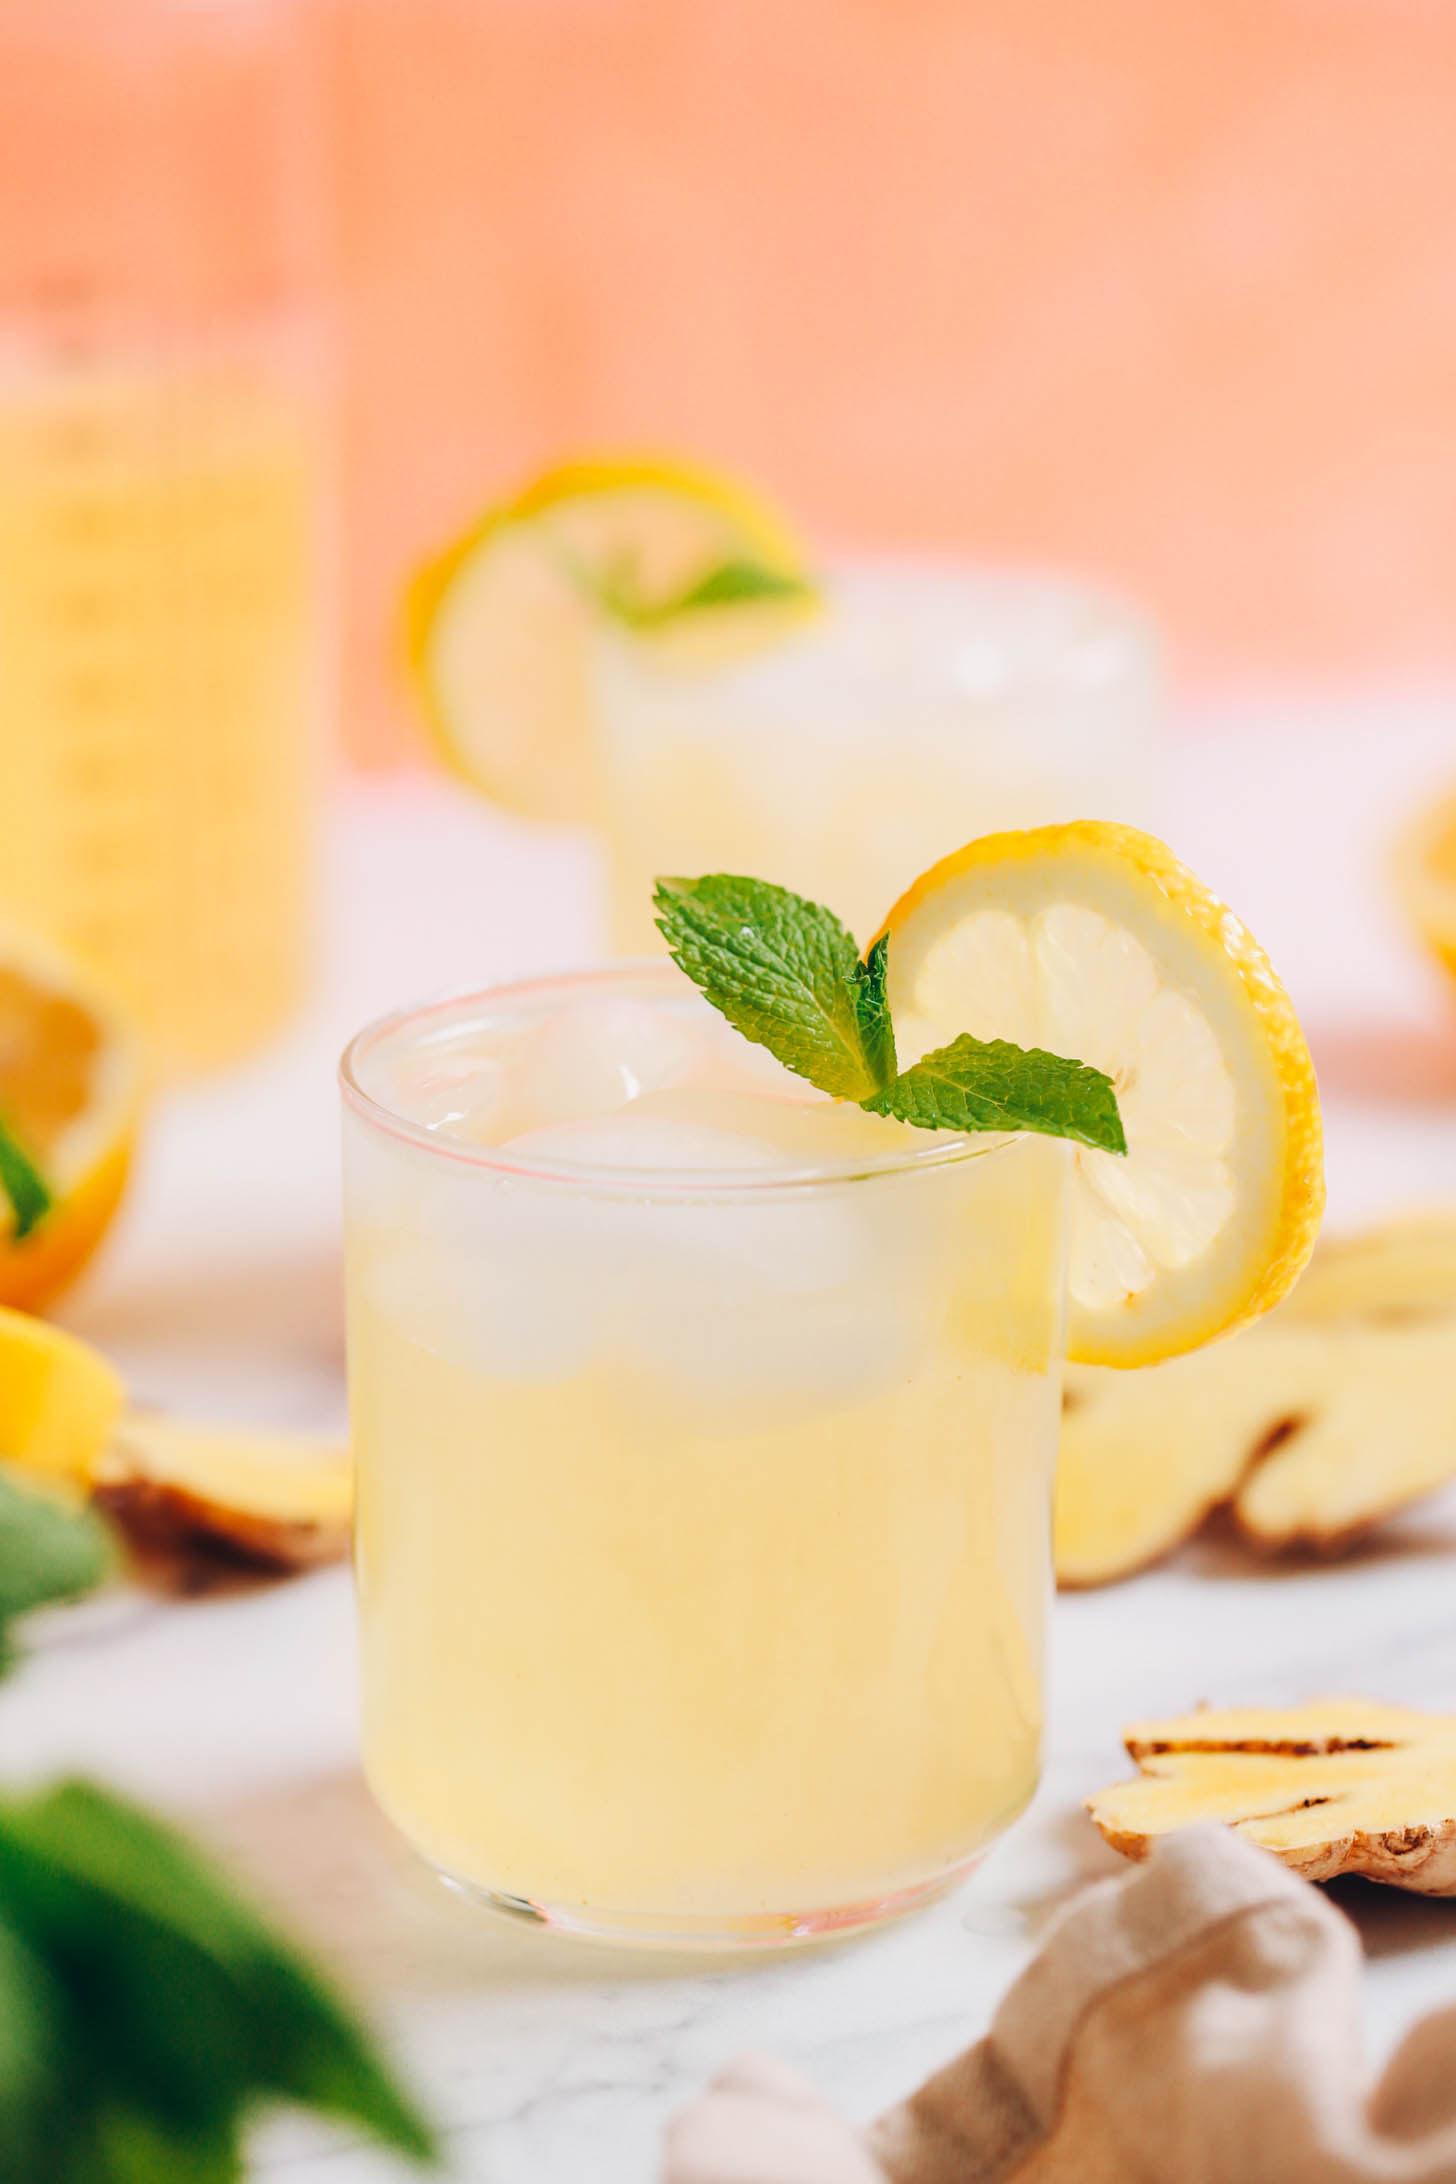 A glass of ginger lemonade with mint leaves and a lemon slice